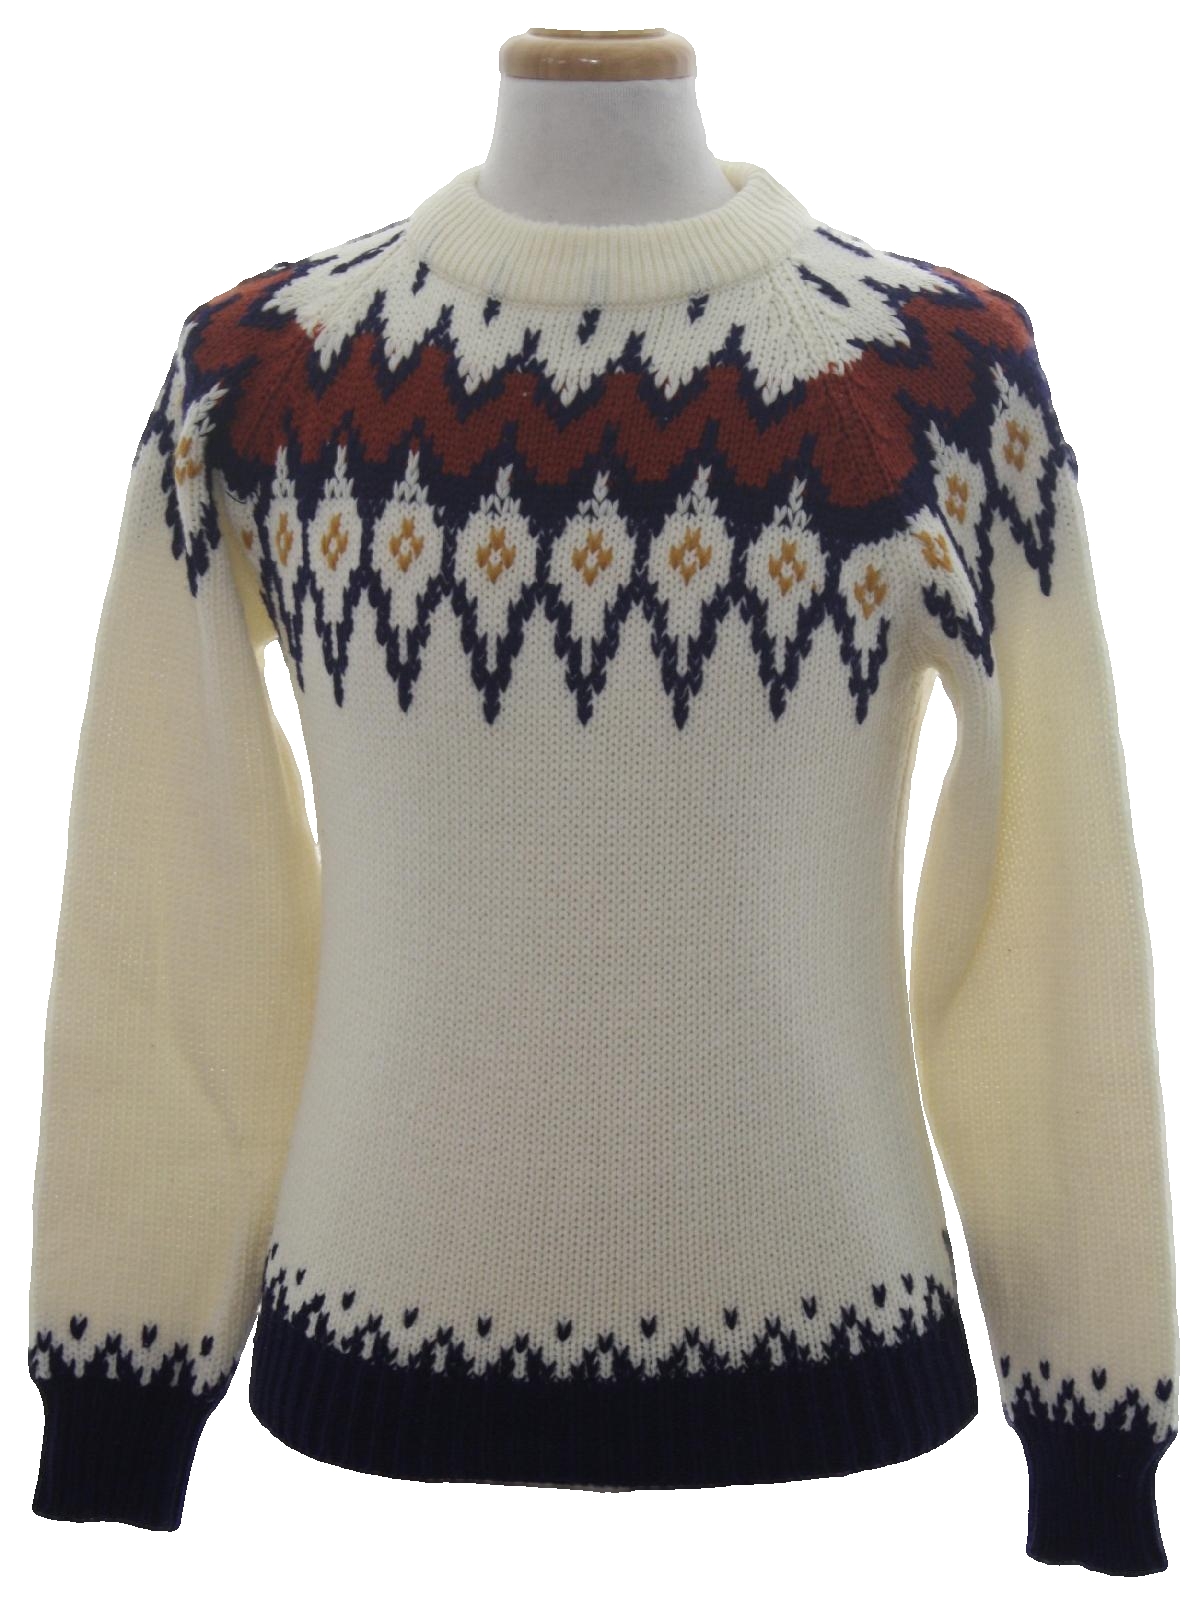 1970's Vintage Sigallo Sweater: 70s -Sigallo- Mens winter white with ...